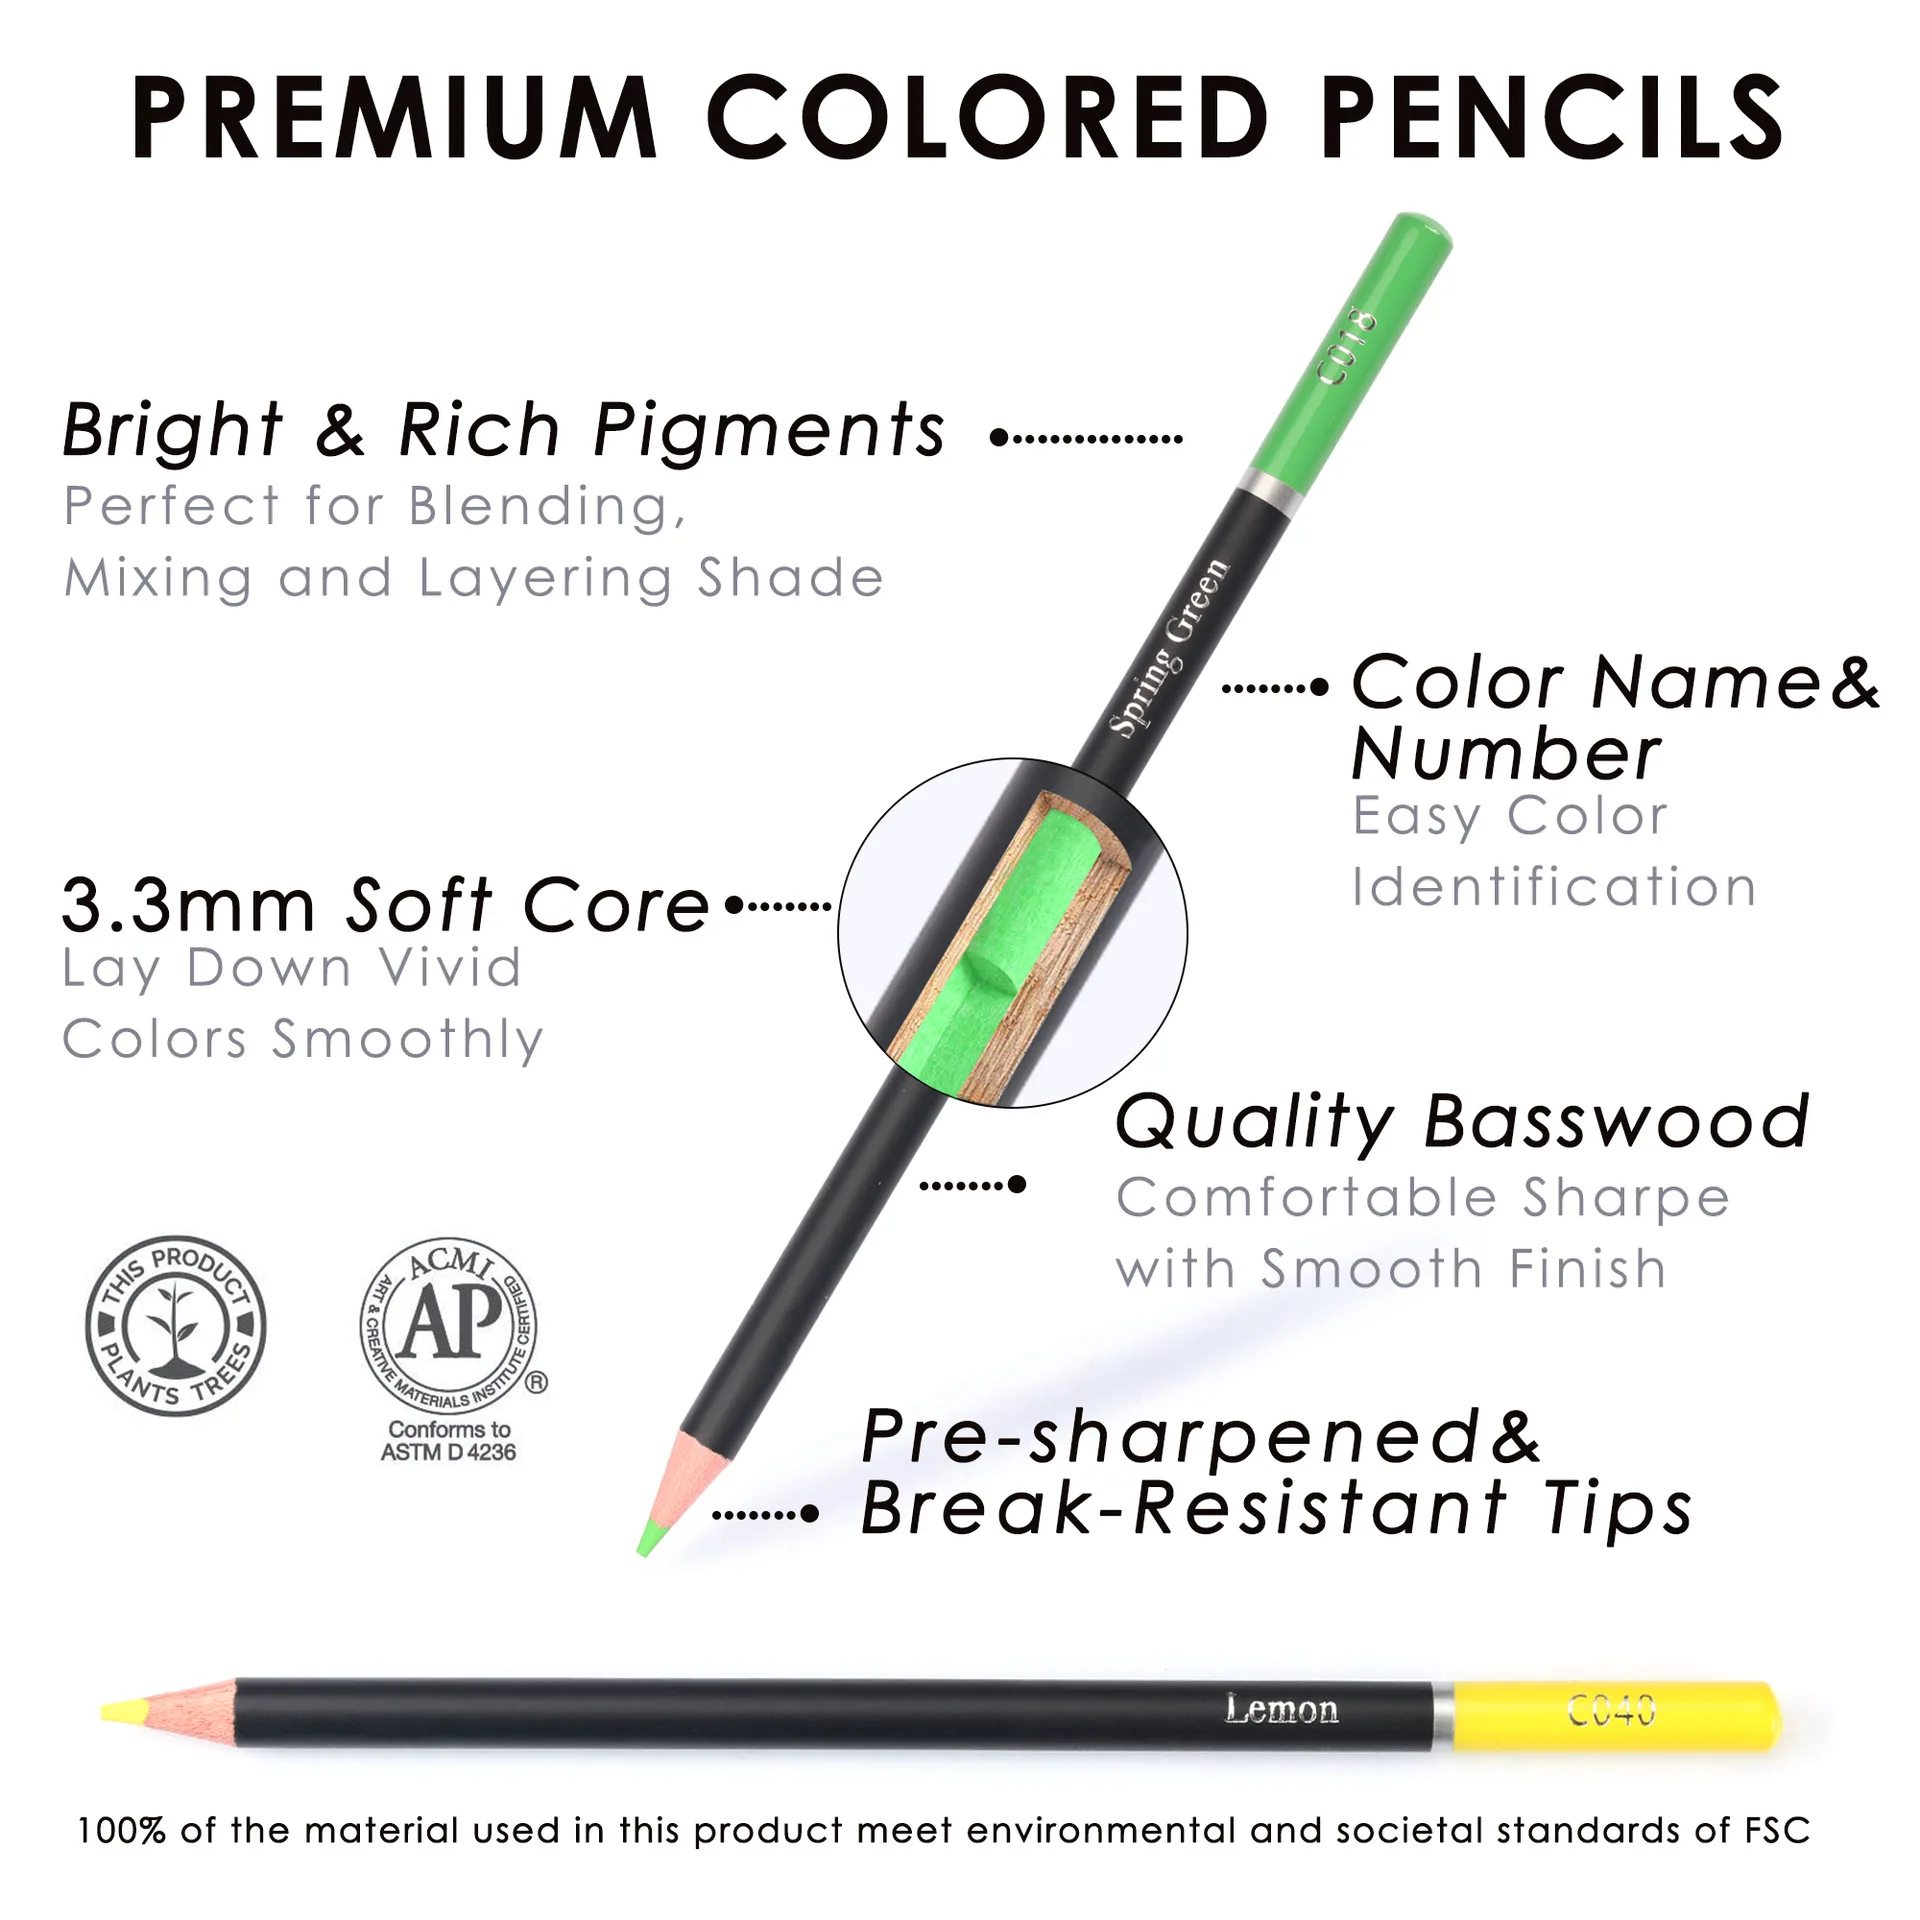 https://ae01.alicdn.com/kf/S7b85eb3acbfb4dc18574db652581be65R/72-Colors-Oily-Colored-Pencil-Paper-Tube-Set-Graffiti-Sketch-Colored-Pencils-Suitable-for-Artist-Beginner.jpg